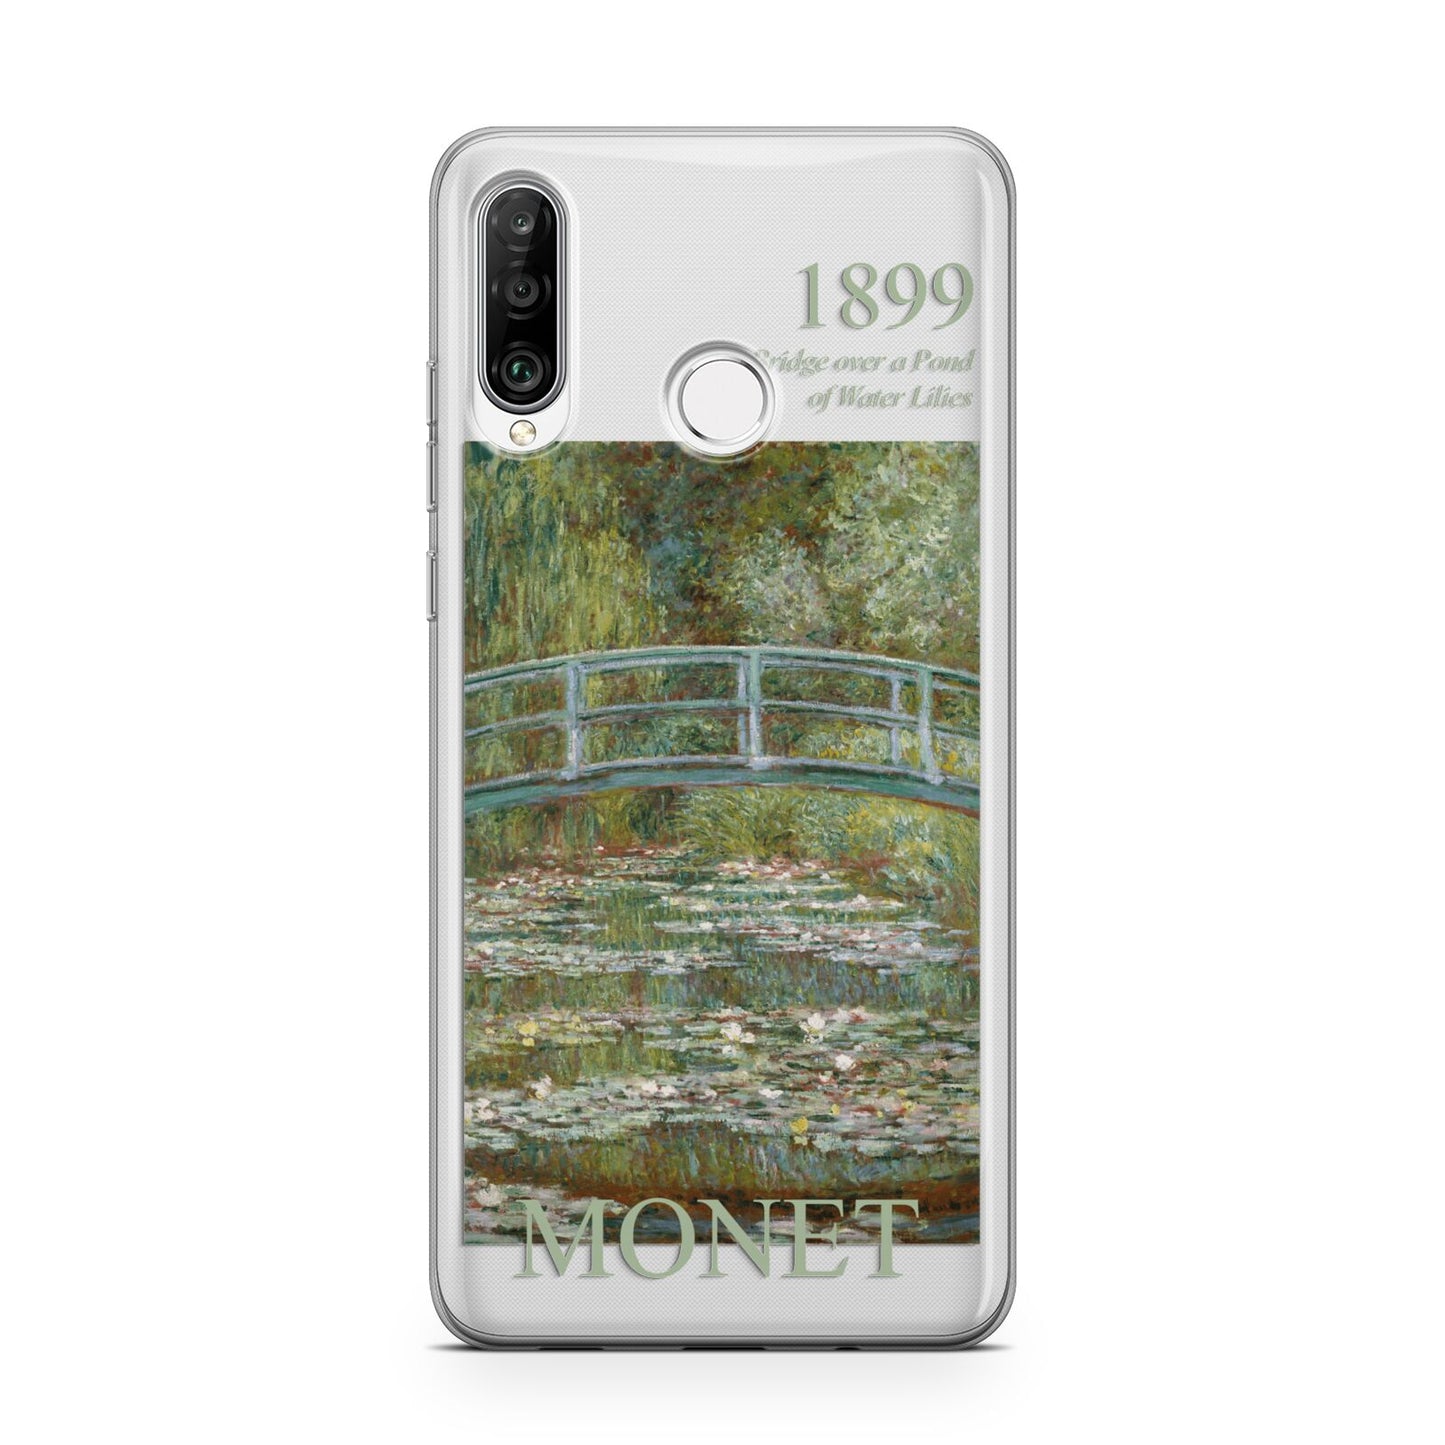 Bridge Over A Pond Of Water Lilies By Monet Huawei P30 Lite Phone Case